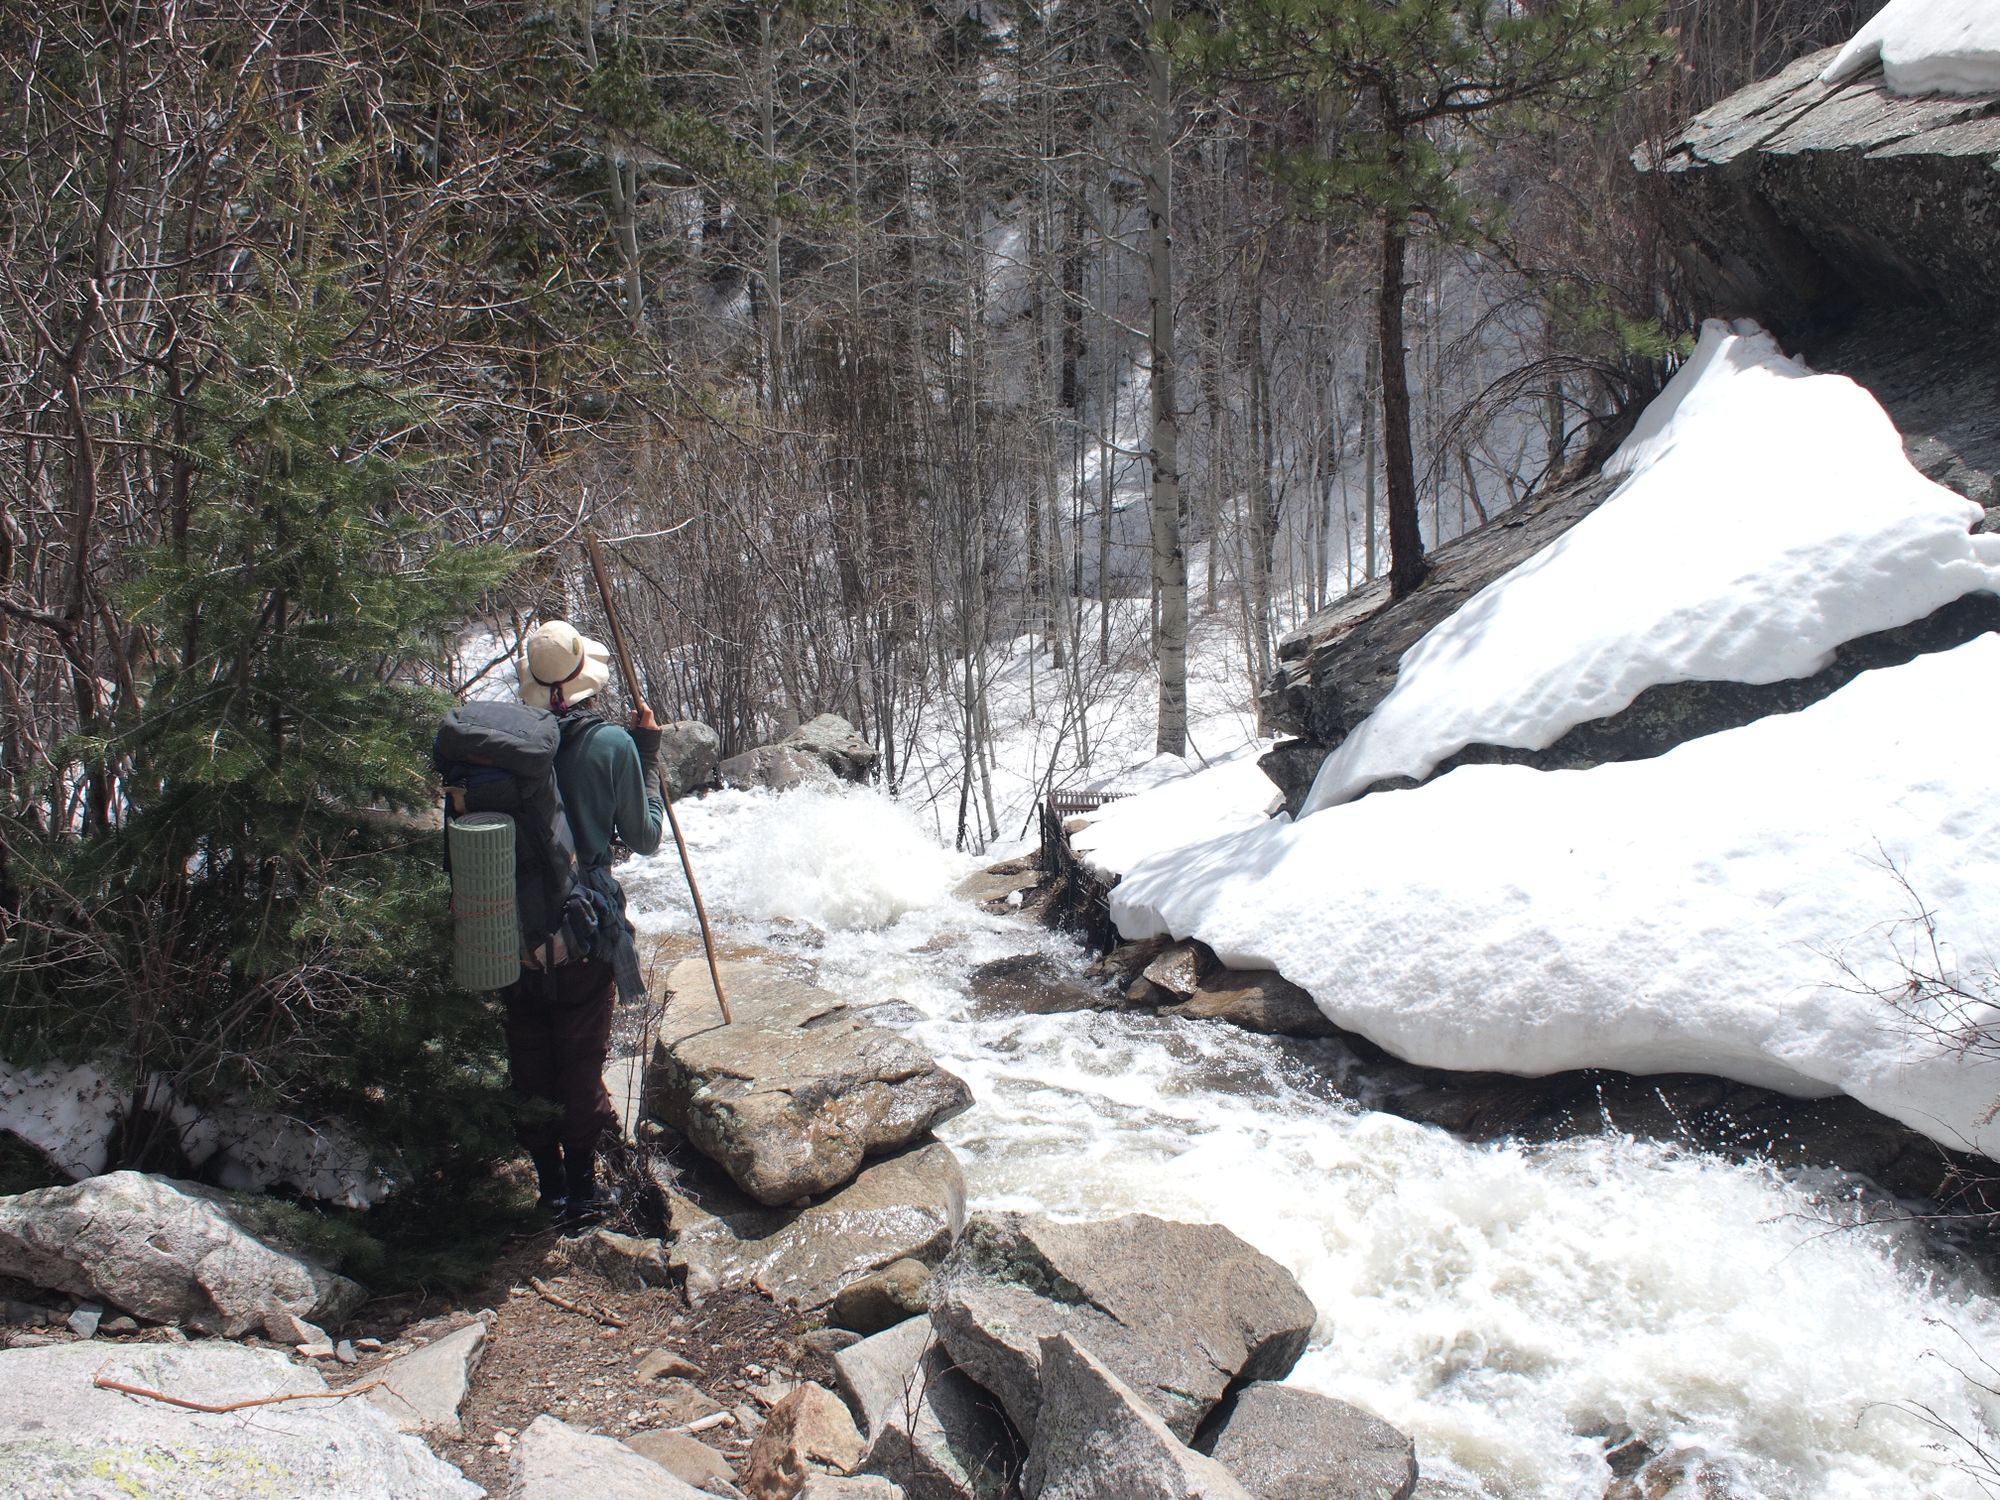 A man wearing a large backpack stands in a narrow canyon next to a raging whitewater creek liked with pine trees and snow